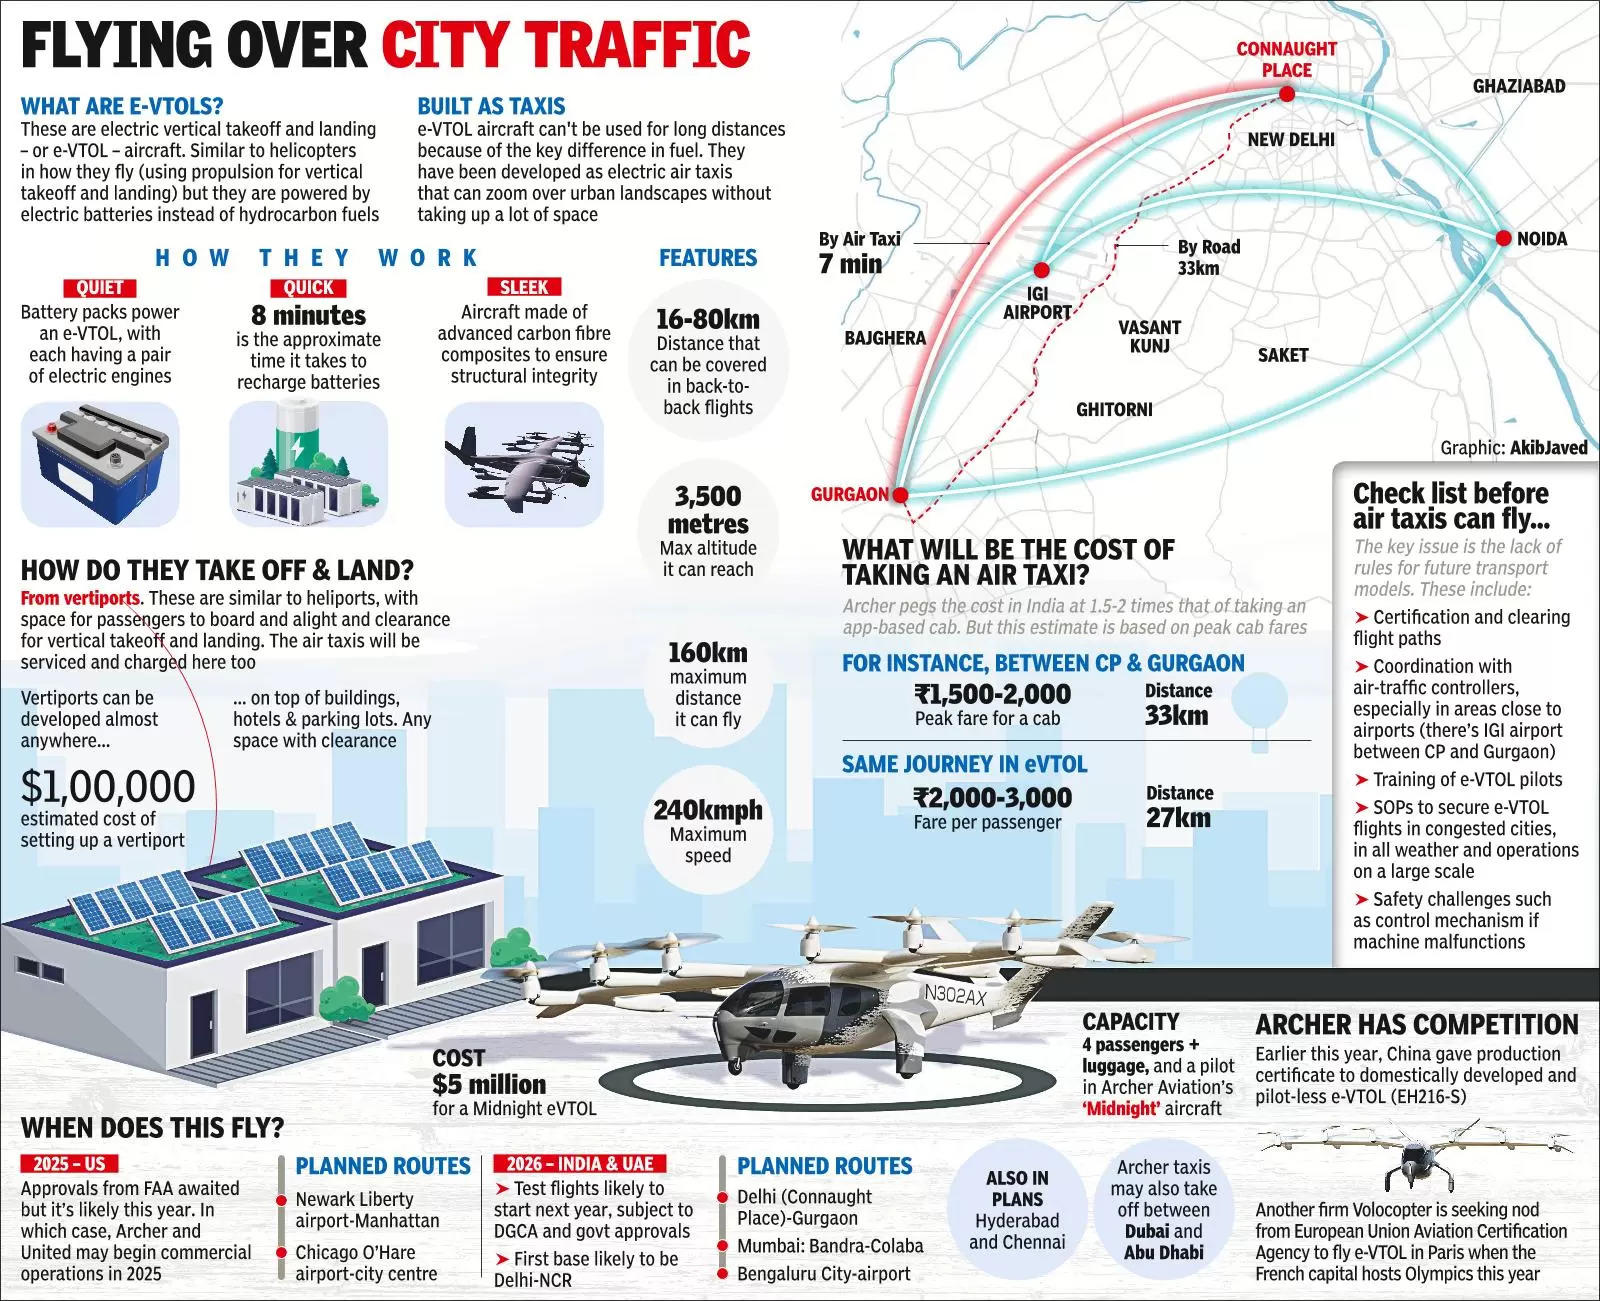 Can air taxis fly between Delhi and Gurgaon?